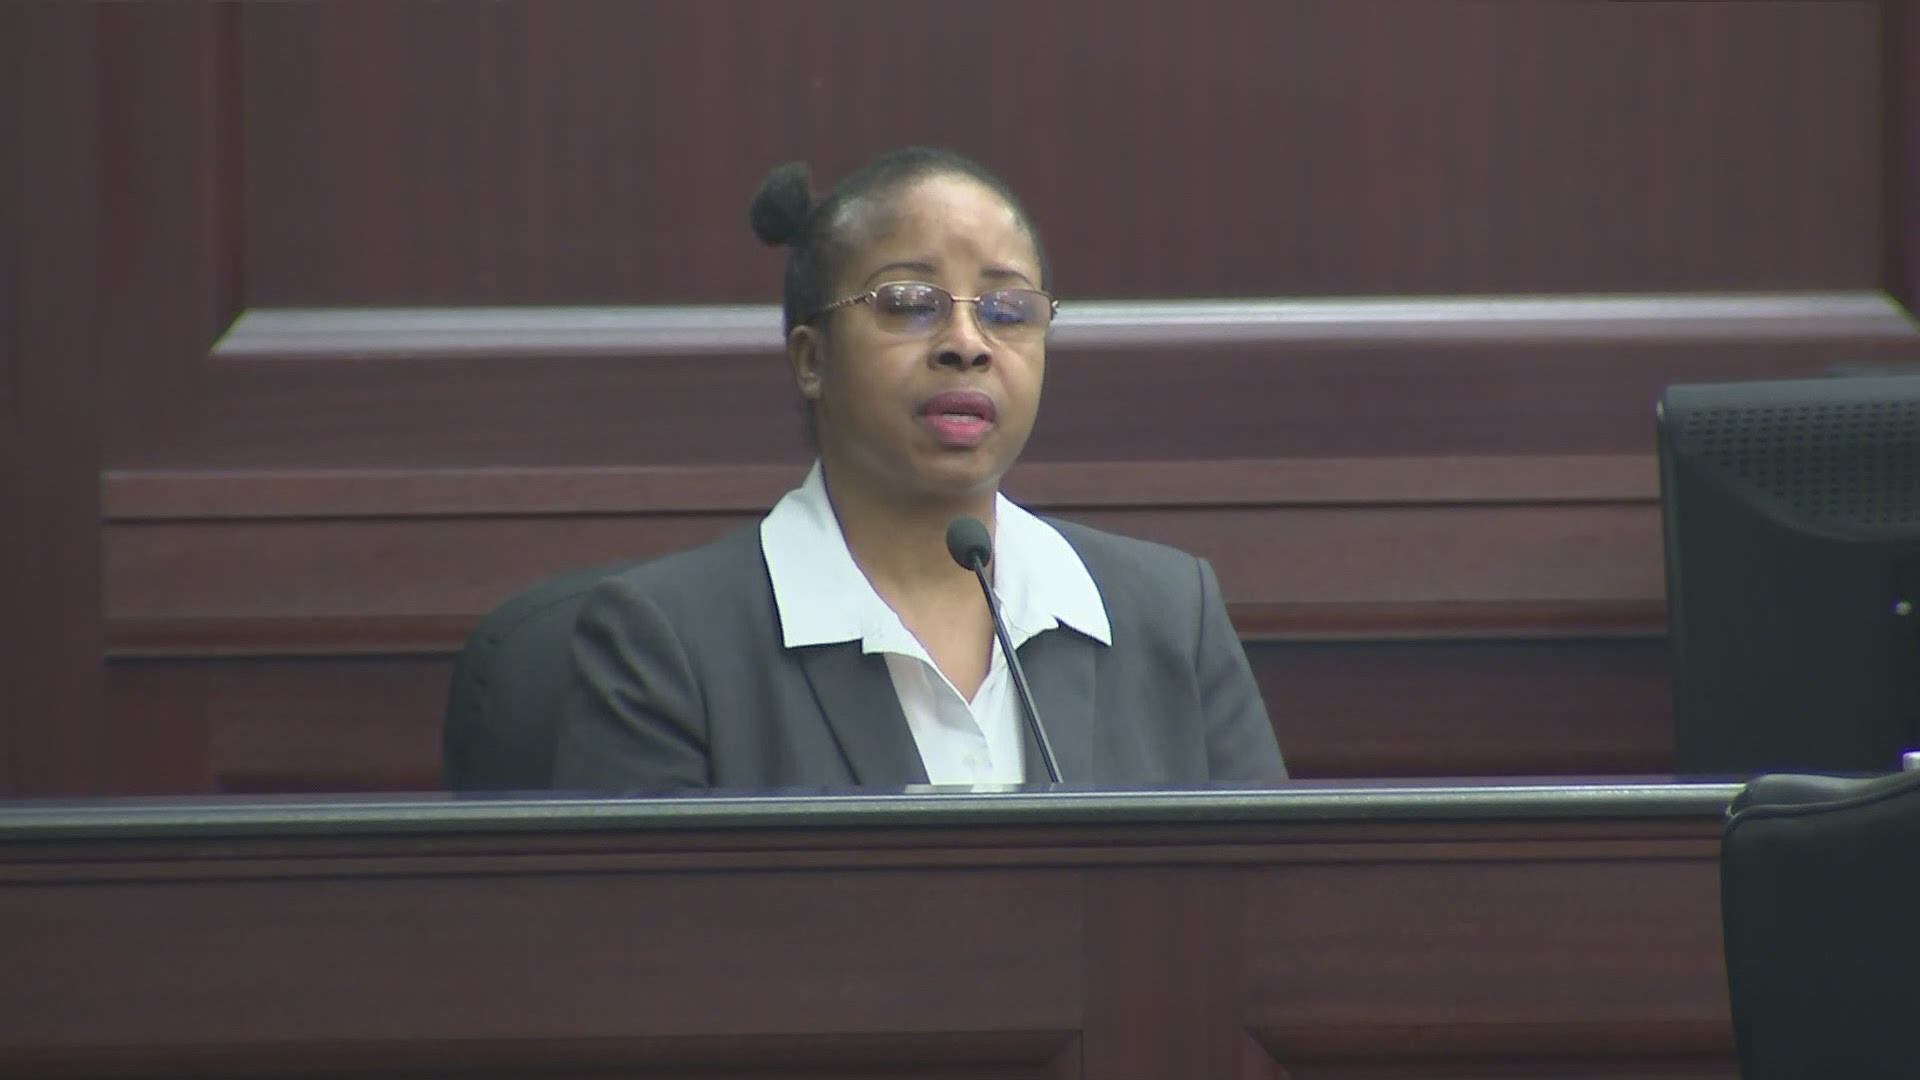 Kidnapper Gloria Williams testified in court Friday that she was in an abusive relationship and suffered a miscarriage in the years leading up to her kidnapping Kamiyah Mobley from a Jacksonville hospital 19 years ago.